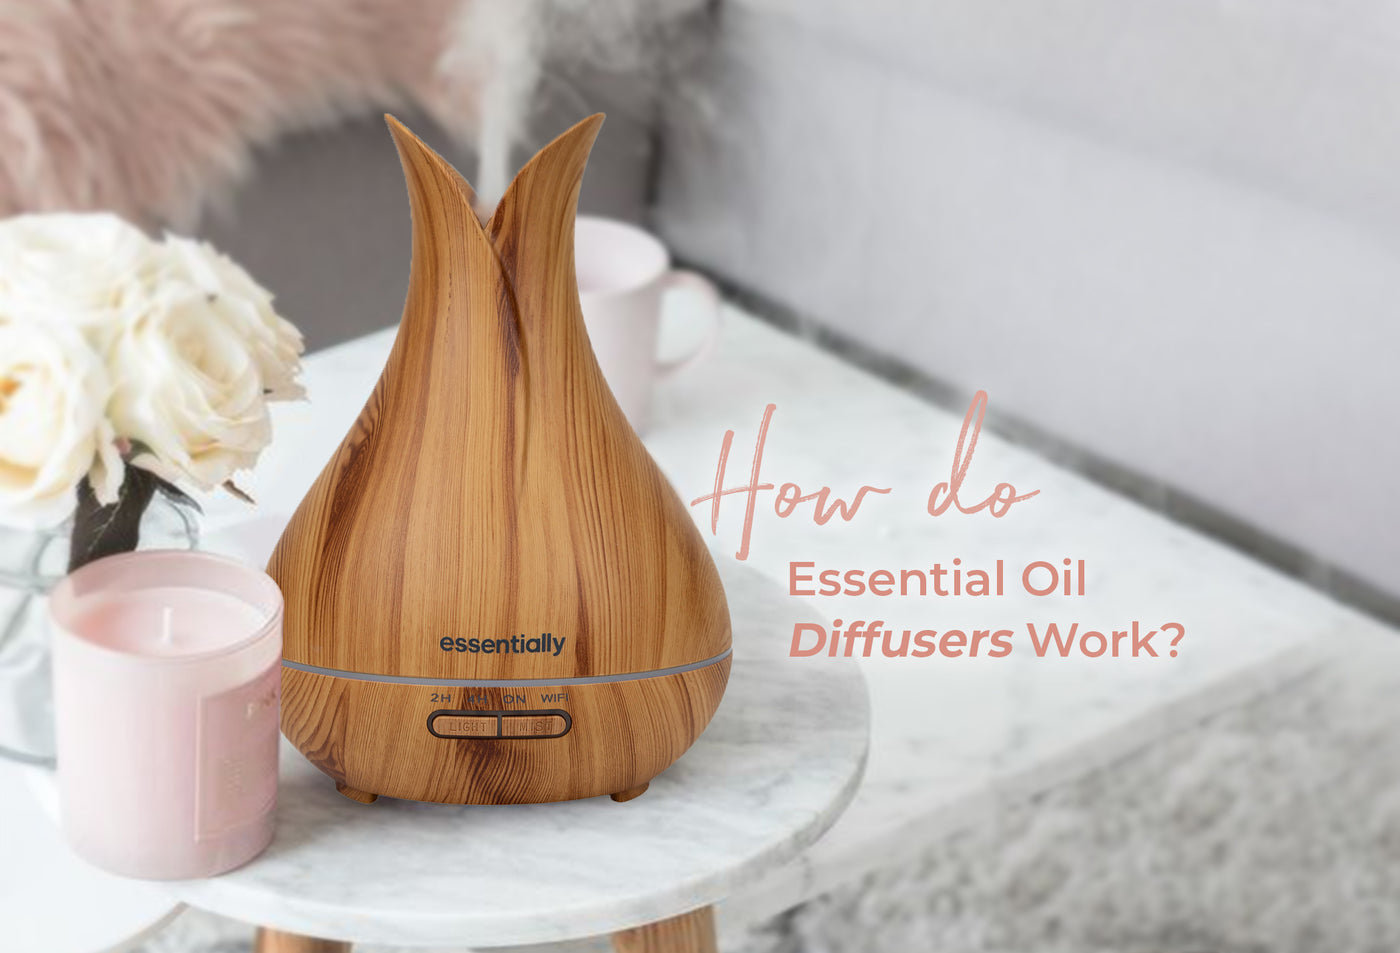 How do essential oil diffusers work